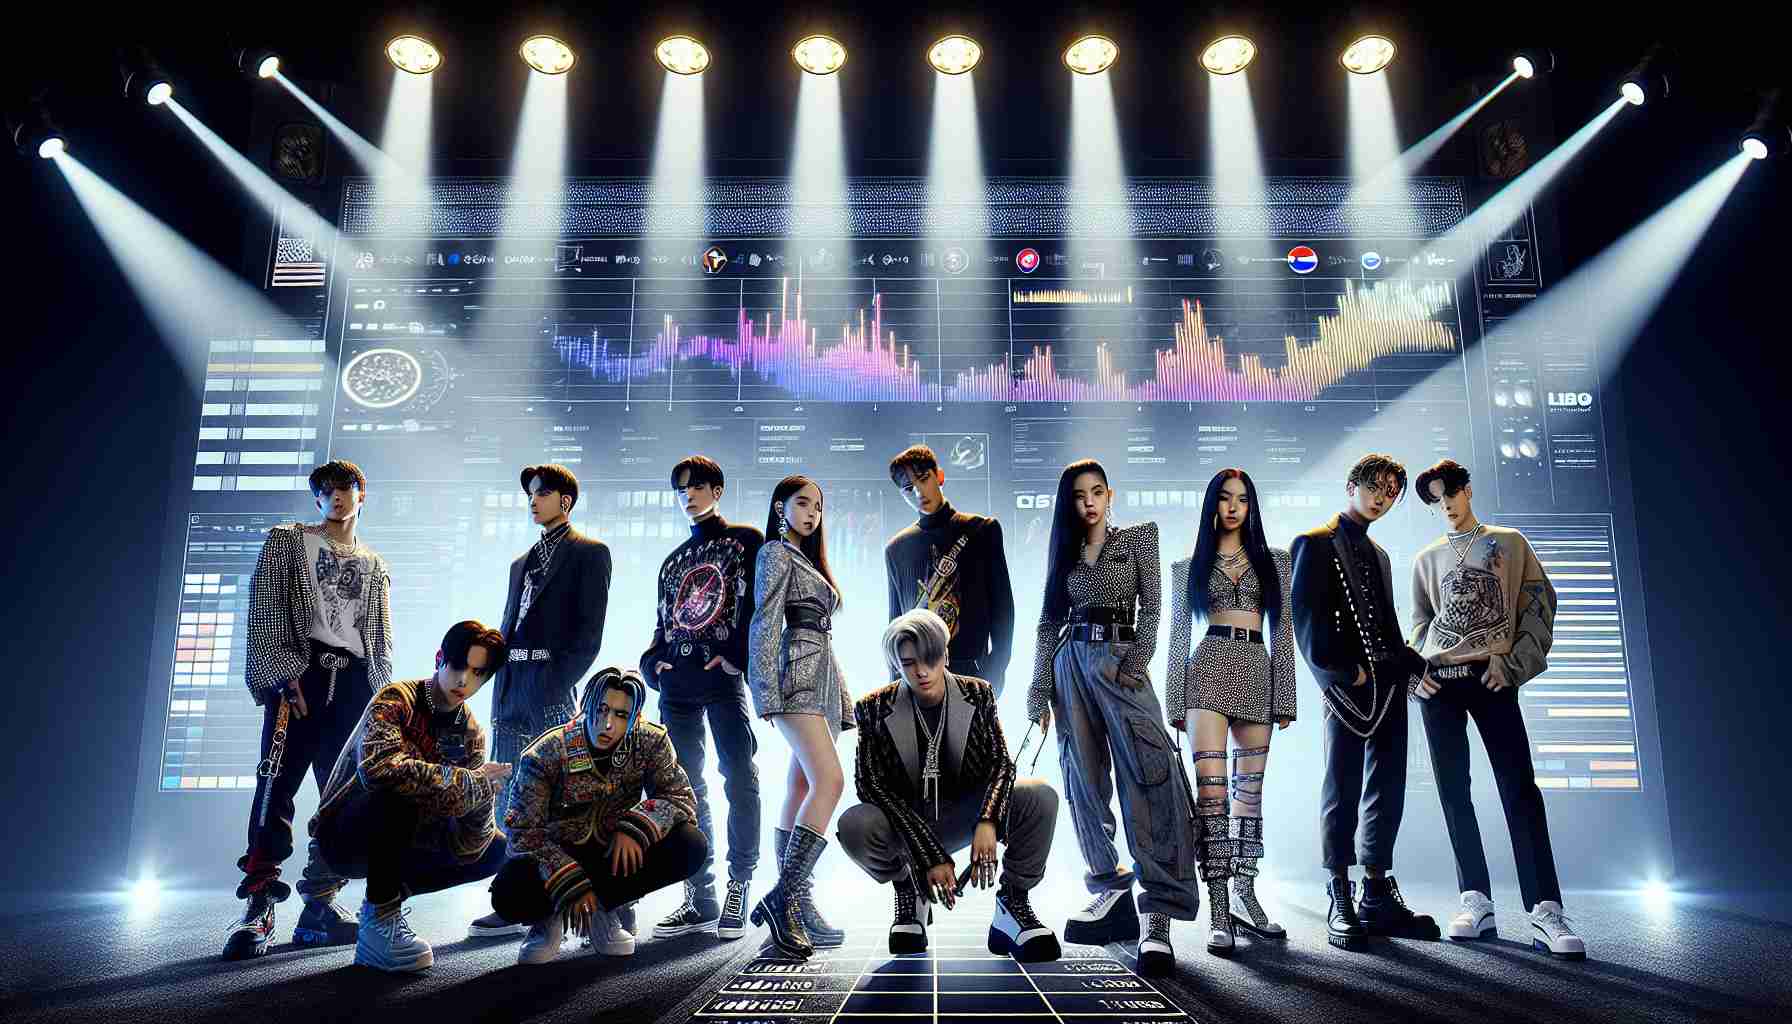 HD image portraying a group of K-Pop stars, standing on a global music chart-themed stage with spotlights illuminating them. The group consists of seven individuals, each bringing their unique style and energy. On the left, there are three members: a young East Asian male with a chic hairstyle, a South Asian female in stylish streetwear, and a Middle-Eastern female illuminating the area with her vibrant clothing. On the right, there are three members: a Caucasian female with a sleek, edgy look, a Hispanic male with a flamboyant style, and a Black male with a cool, laid-back appearance. In the center, the leading figure stands out with an enigmatic aura, the individual is an East Asian male exuding confidence and charisma. The background features a large screen displaying music charts with the group's songs soaring high, dominating the global music scene, representing the new wave of K-Pop.